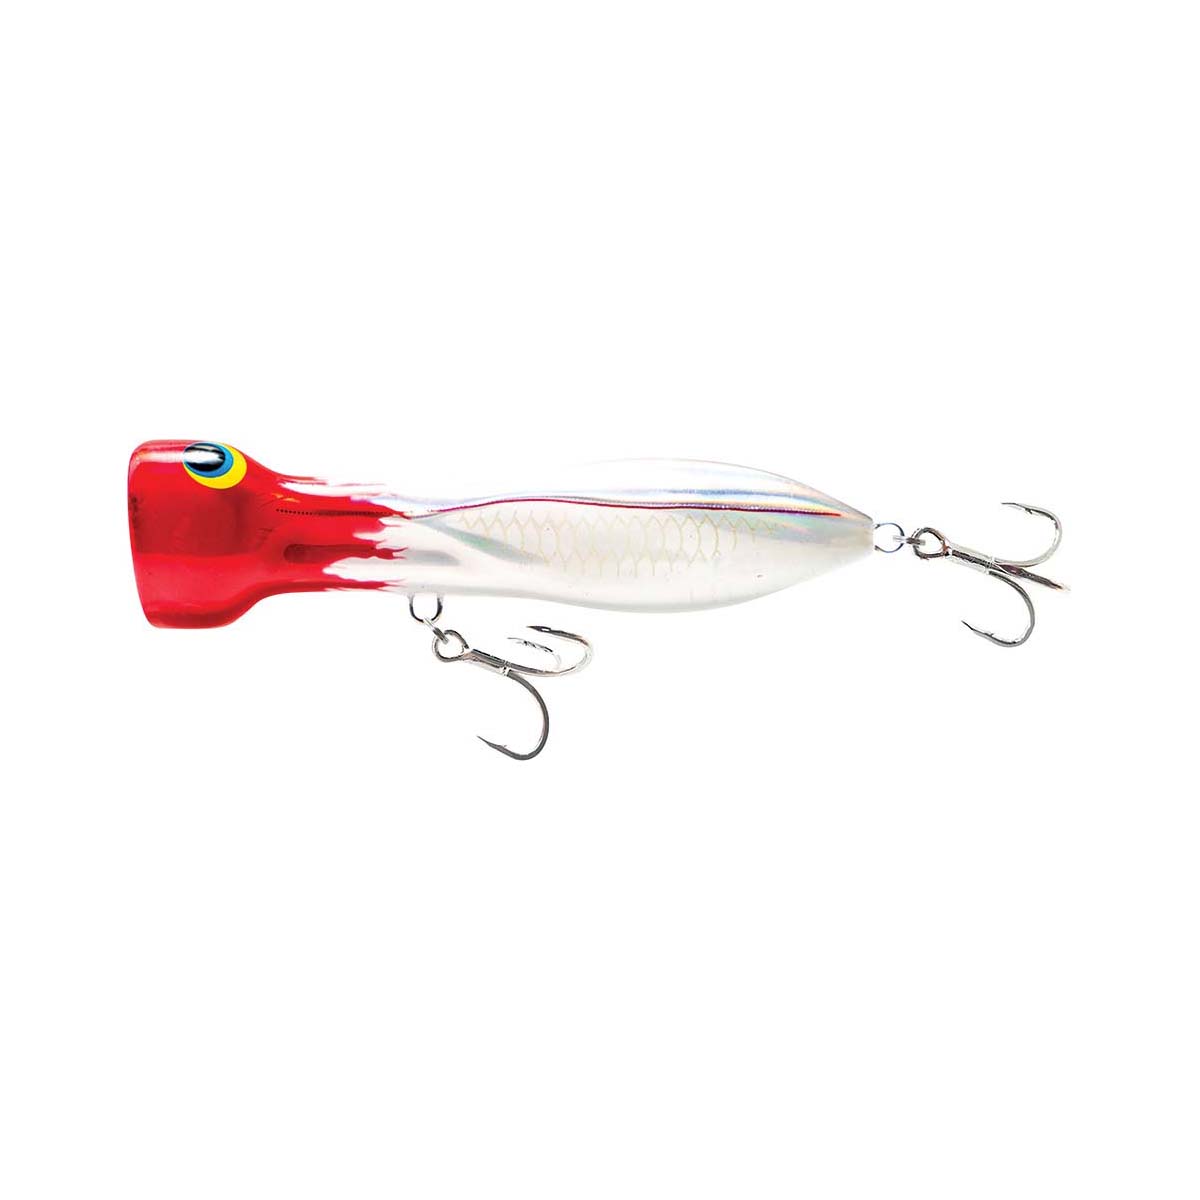 Nomad Chug Norris Surface Popper Lure 9.5cm Fireball Red Head